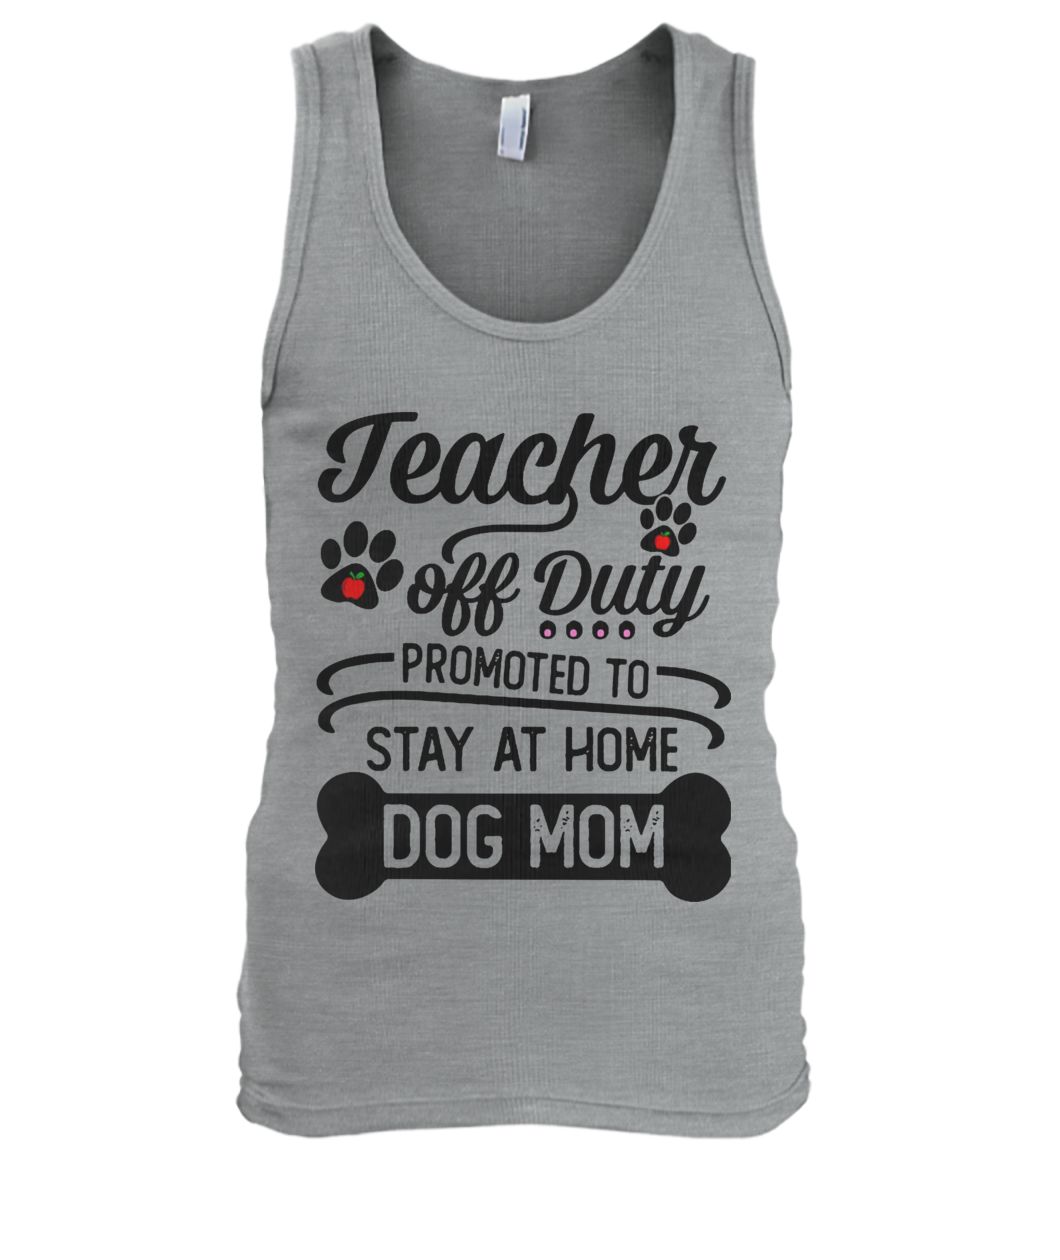 Teacher off duty promoted to say at home dog mom men's tank top